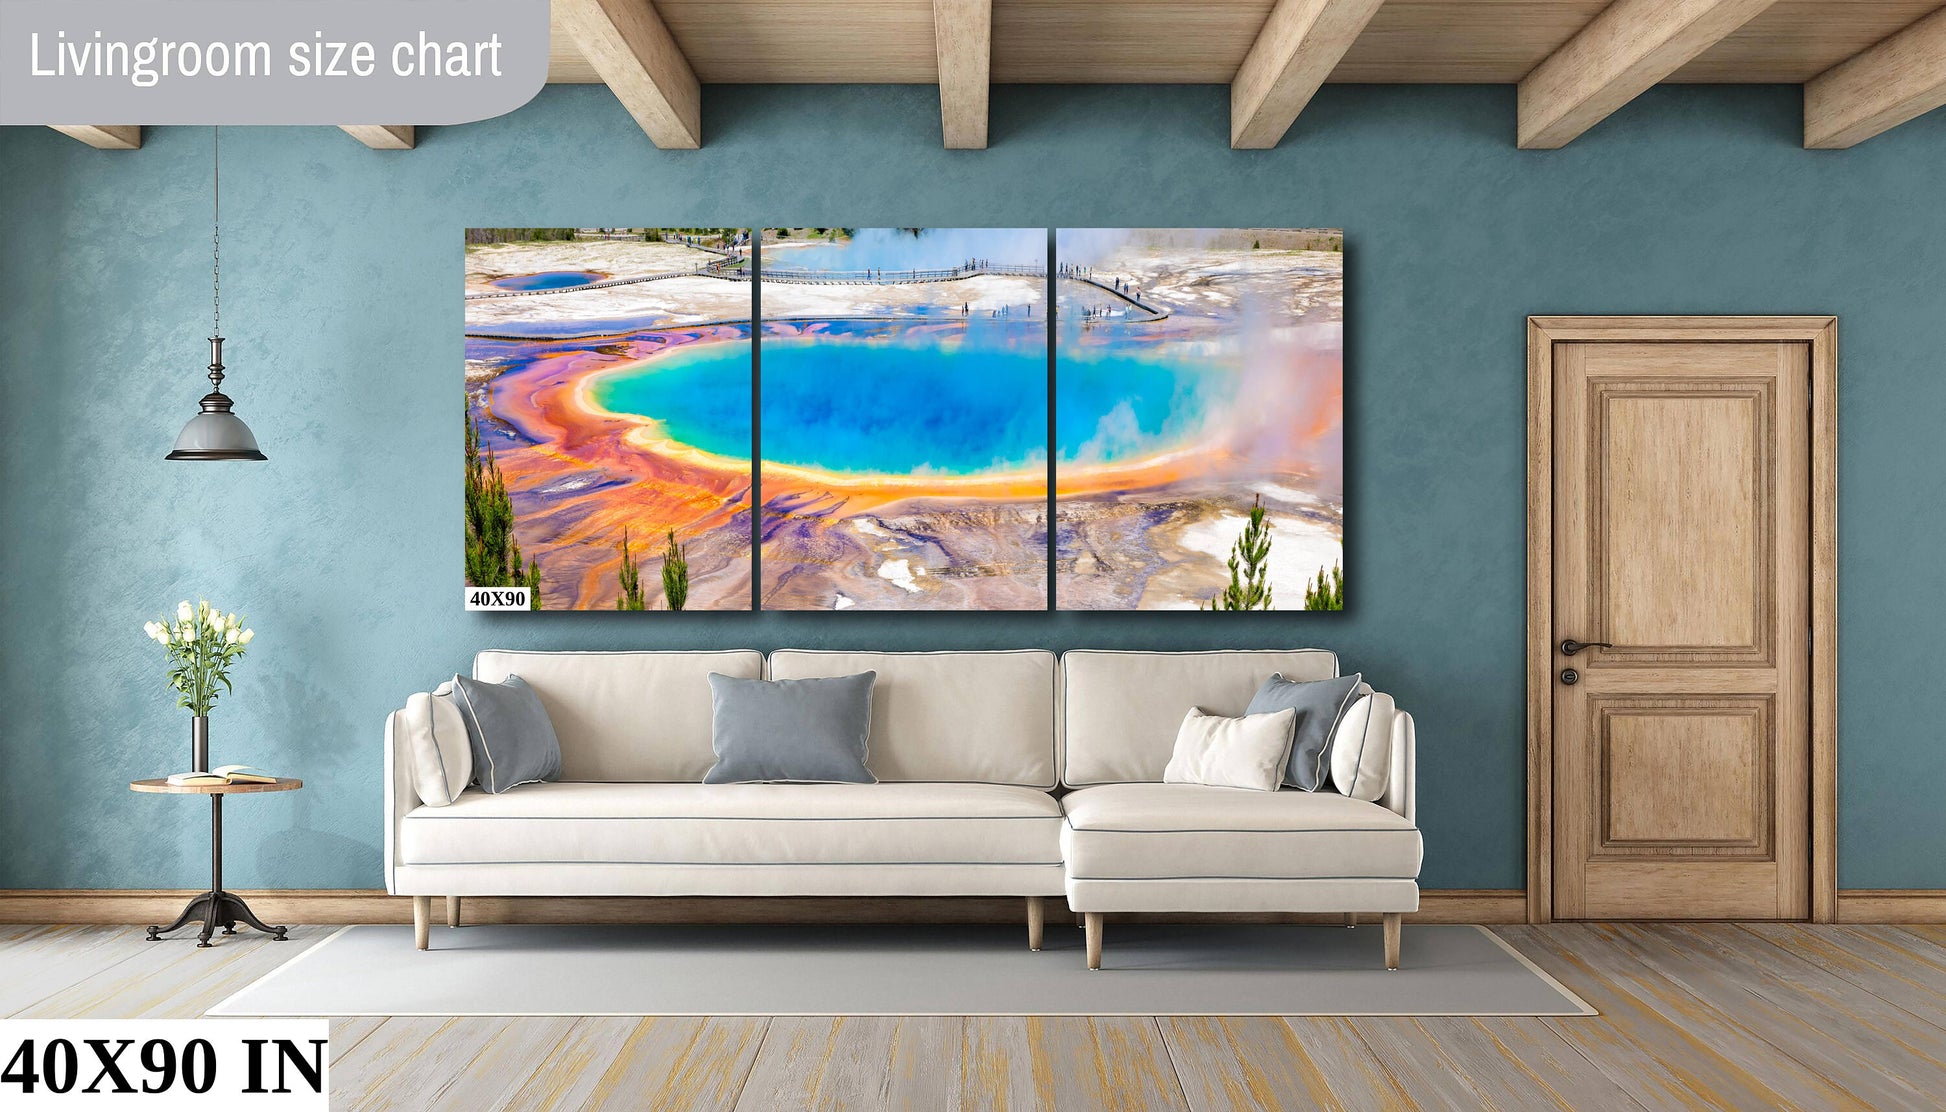 Grand Prismatic Spring Photo, Yellowstone National Park Landscape Print, Wyoming Scenery, Fine Art Wall Photography, Large Nature Canvas